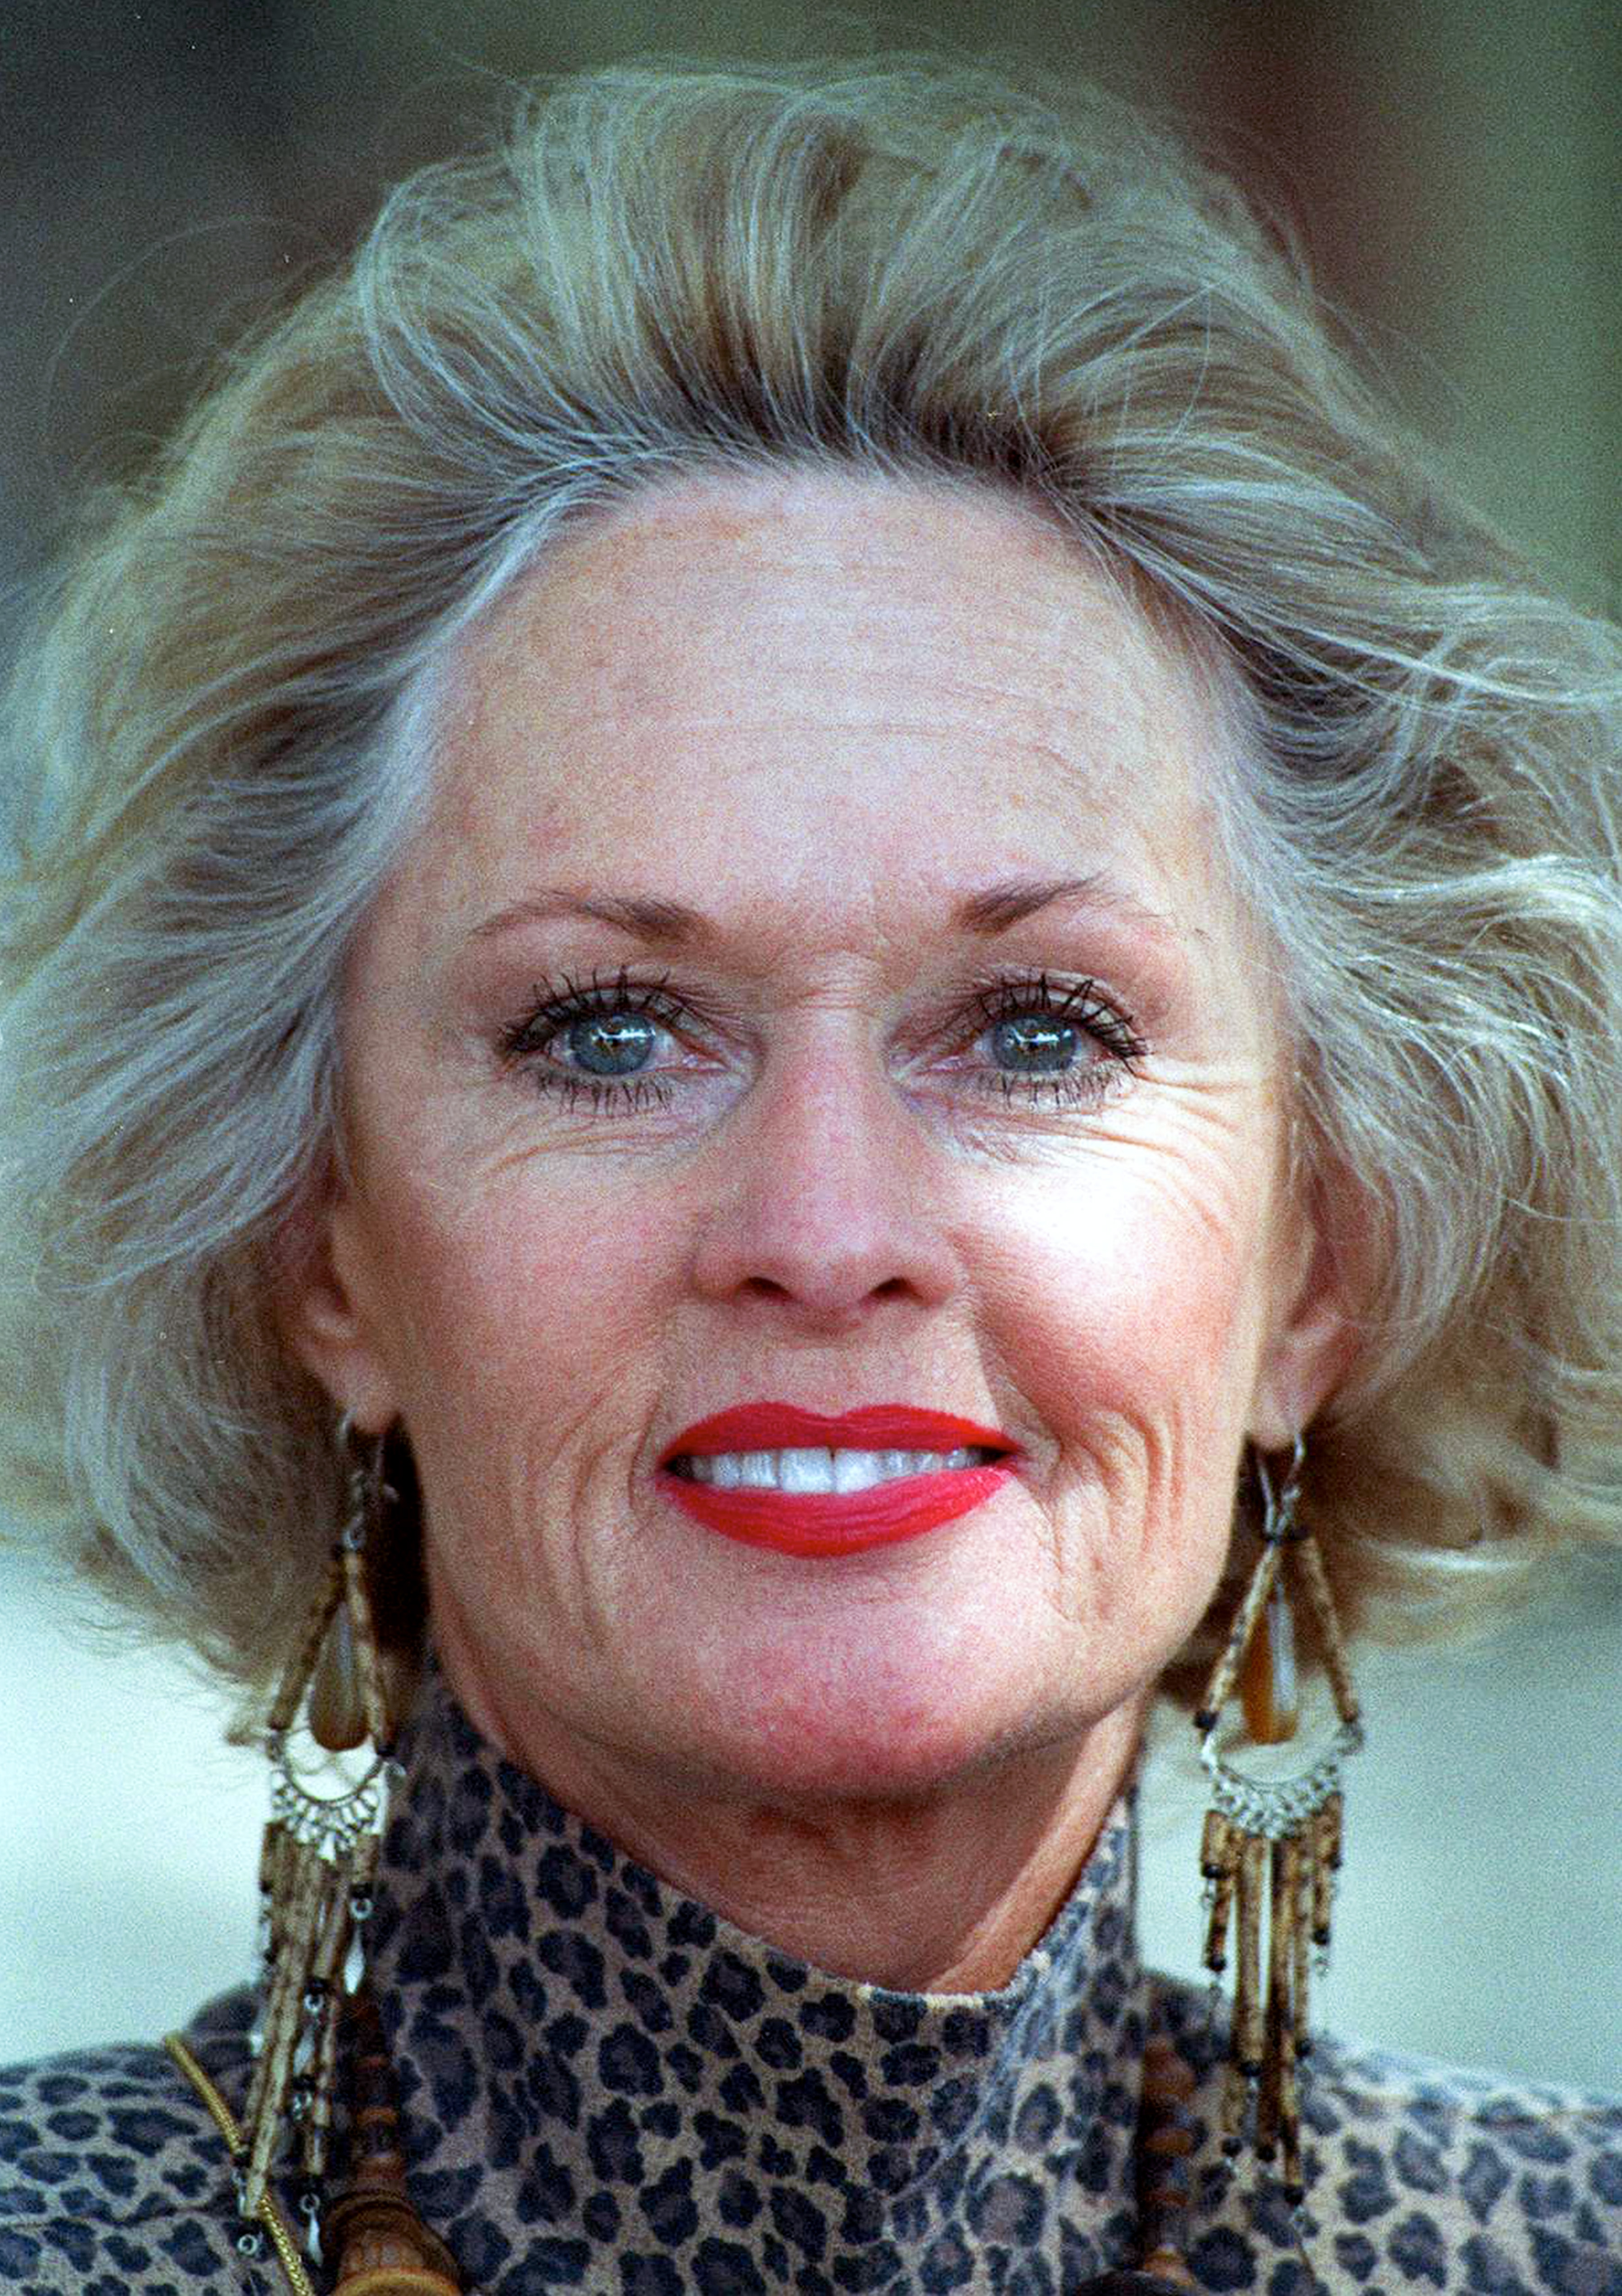 Tippi Hedren, during 'Artists for Shambala' Animal Preservation Benefit in Acton, California, October 30, 1994. | Source: Getty Images